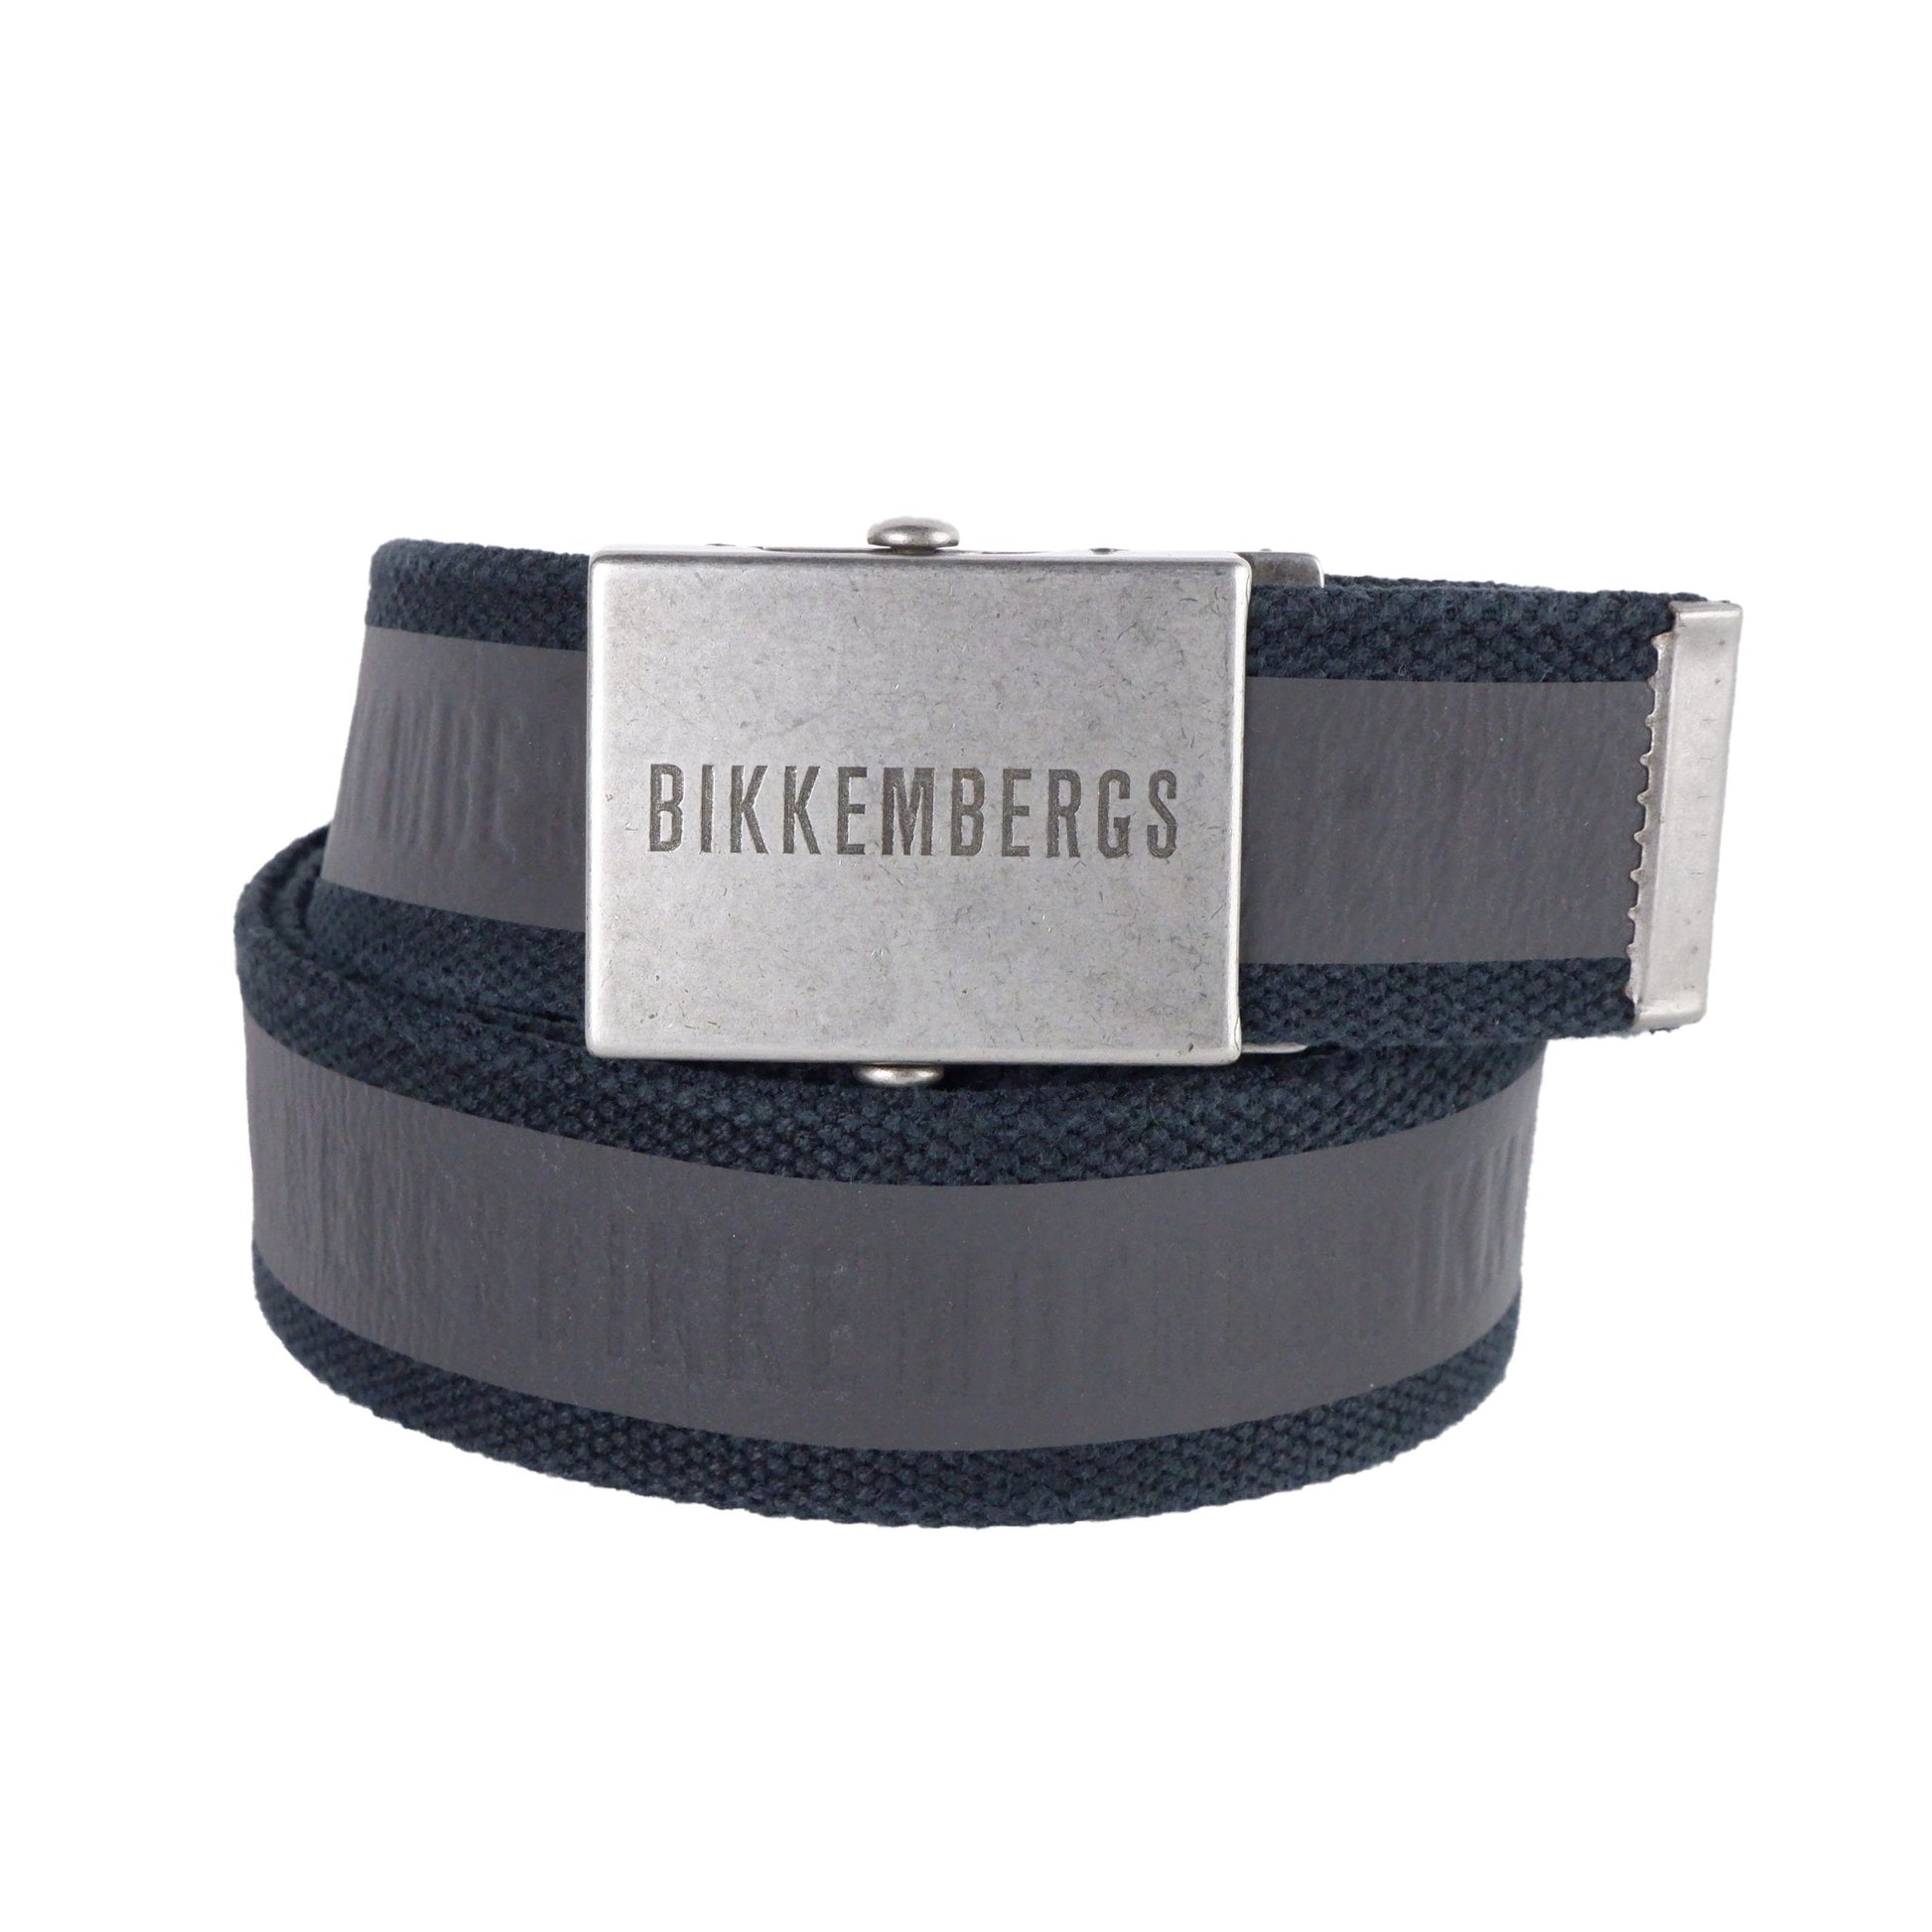 Black Bikkembergs Belt - Designed by Bikkembergs Available to Buy at a Discounted Price on Moon Behind The Hill Online Designer Discount Store